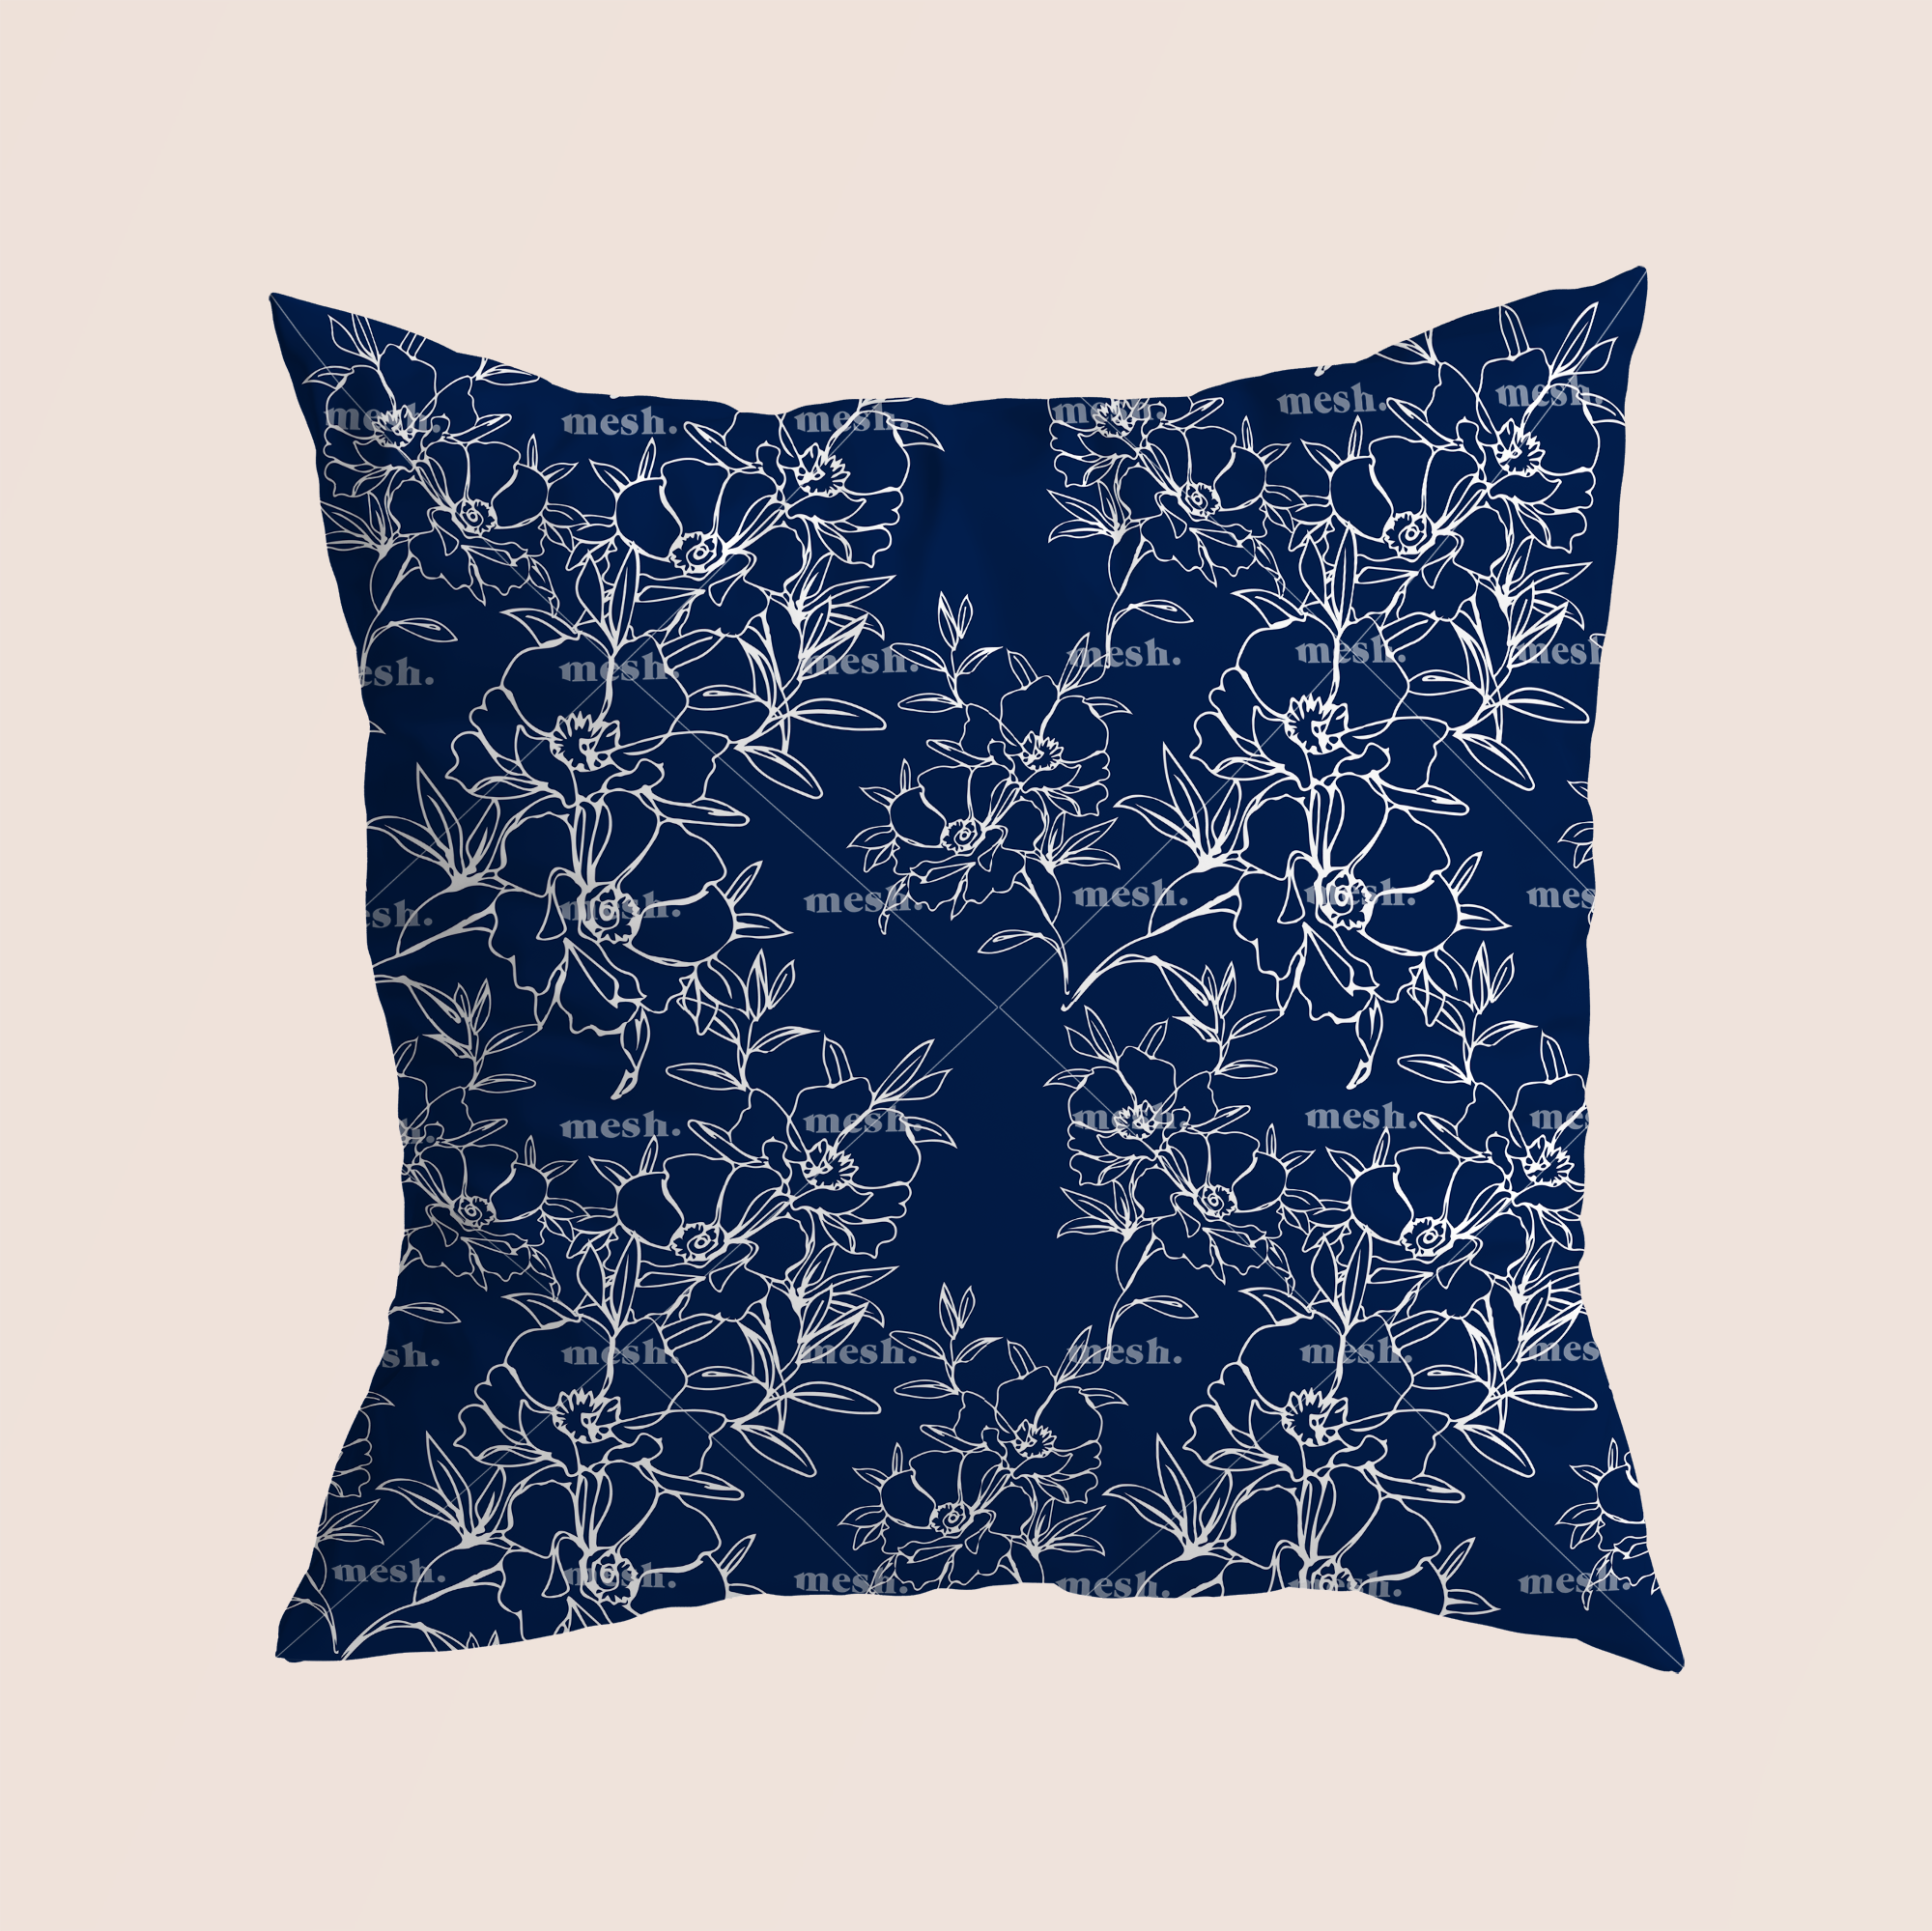 Floral dream full basic in blue pattern design printed on recycled fabric pillow mockup